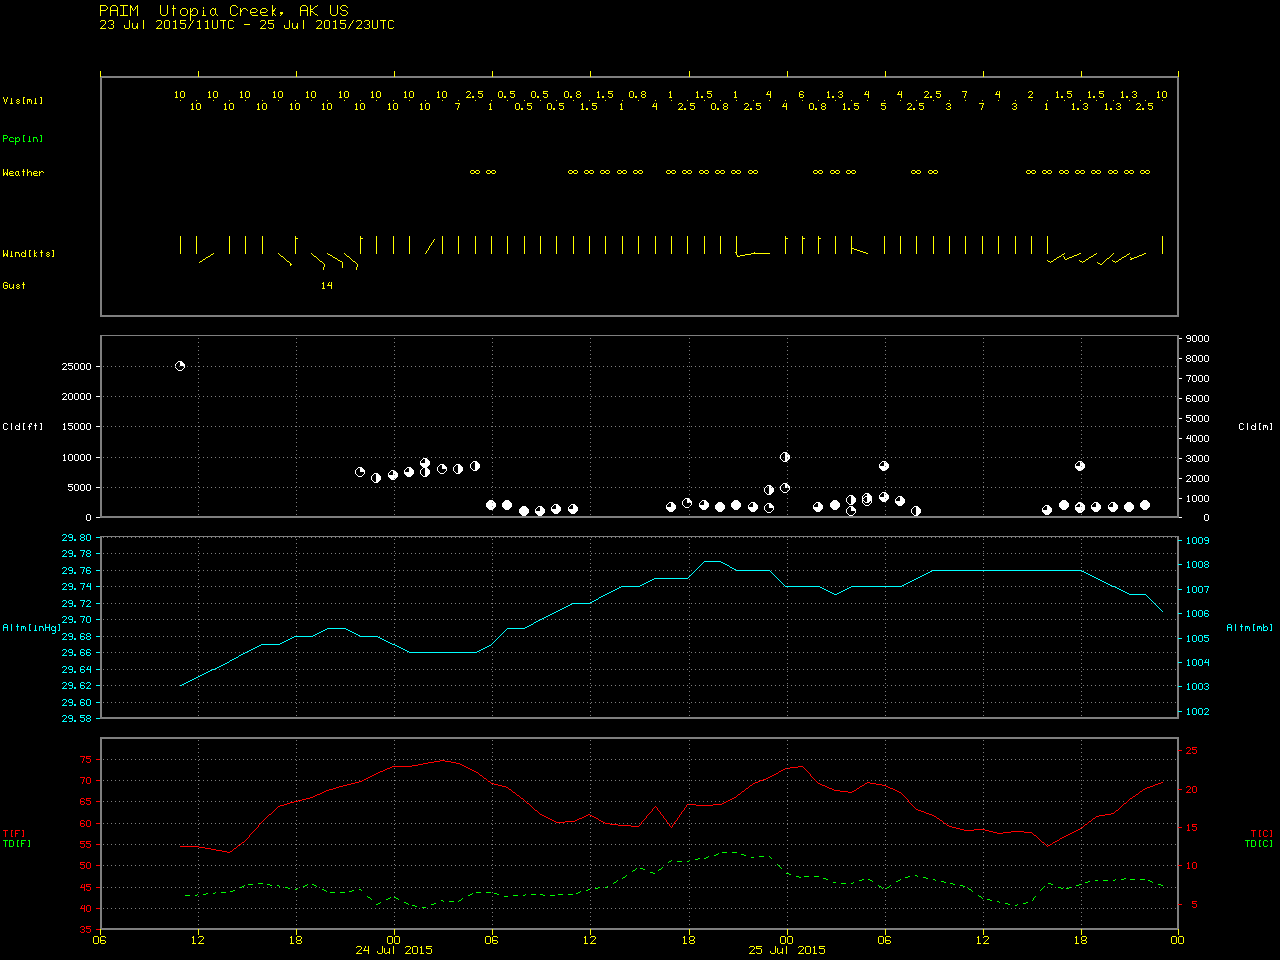 Time series of surface observation from Utopia Creek, Indian Mountain airport [click to enlarge]